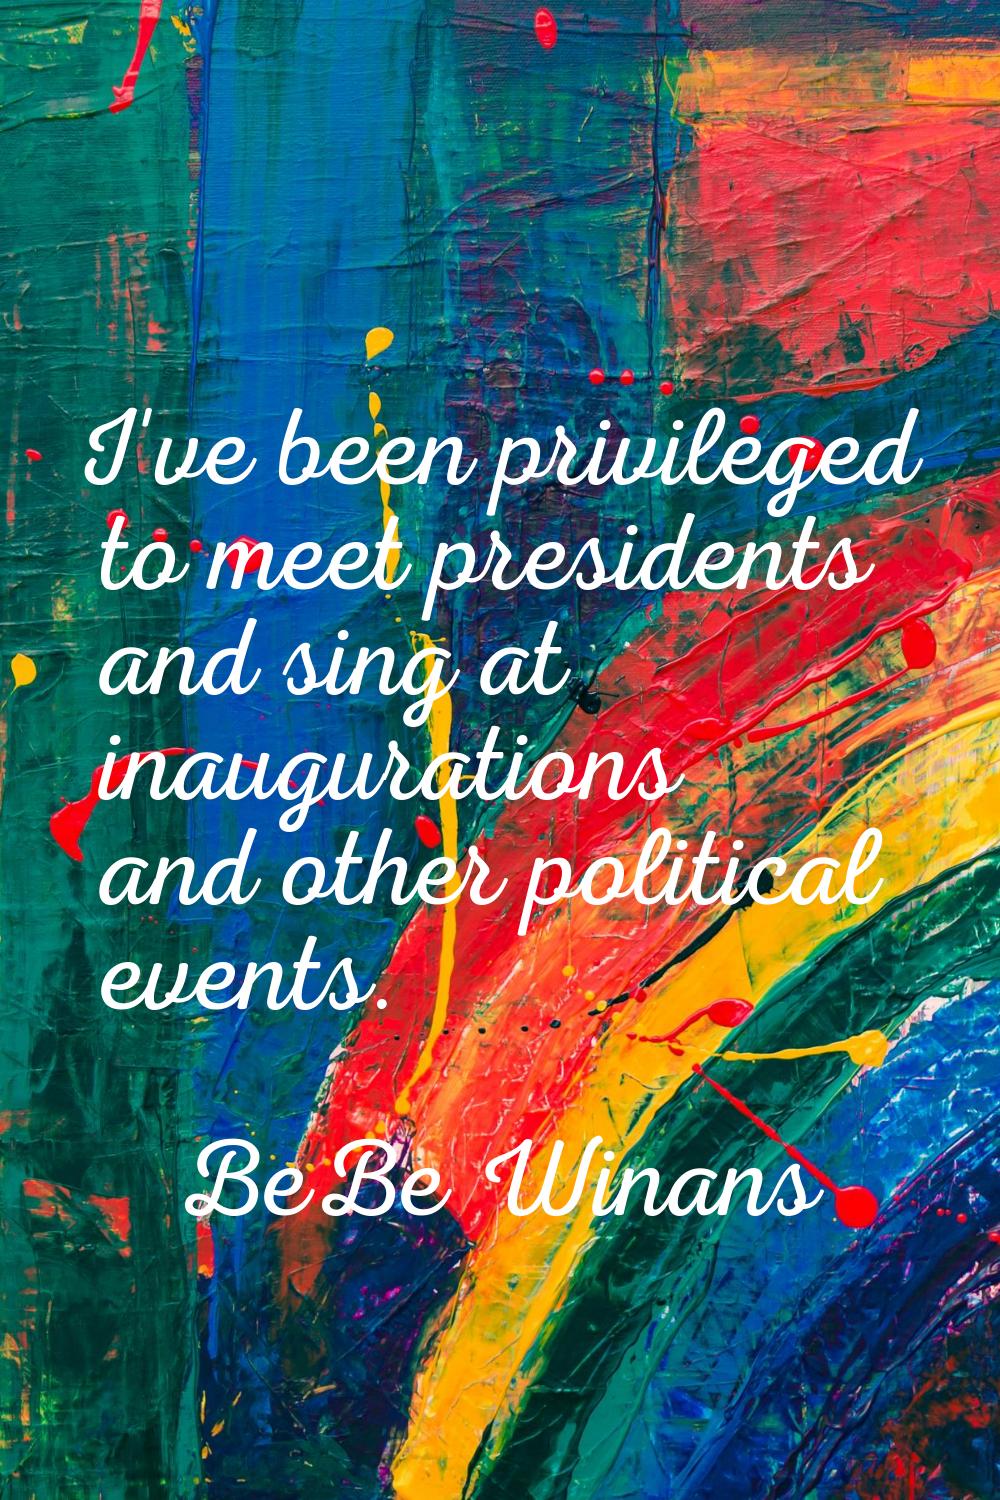 I've been privileged to meet presidents and sing at inaugurations and other political events.